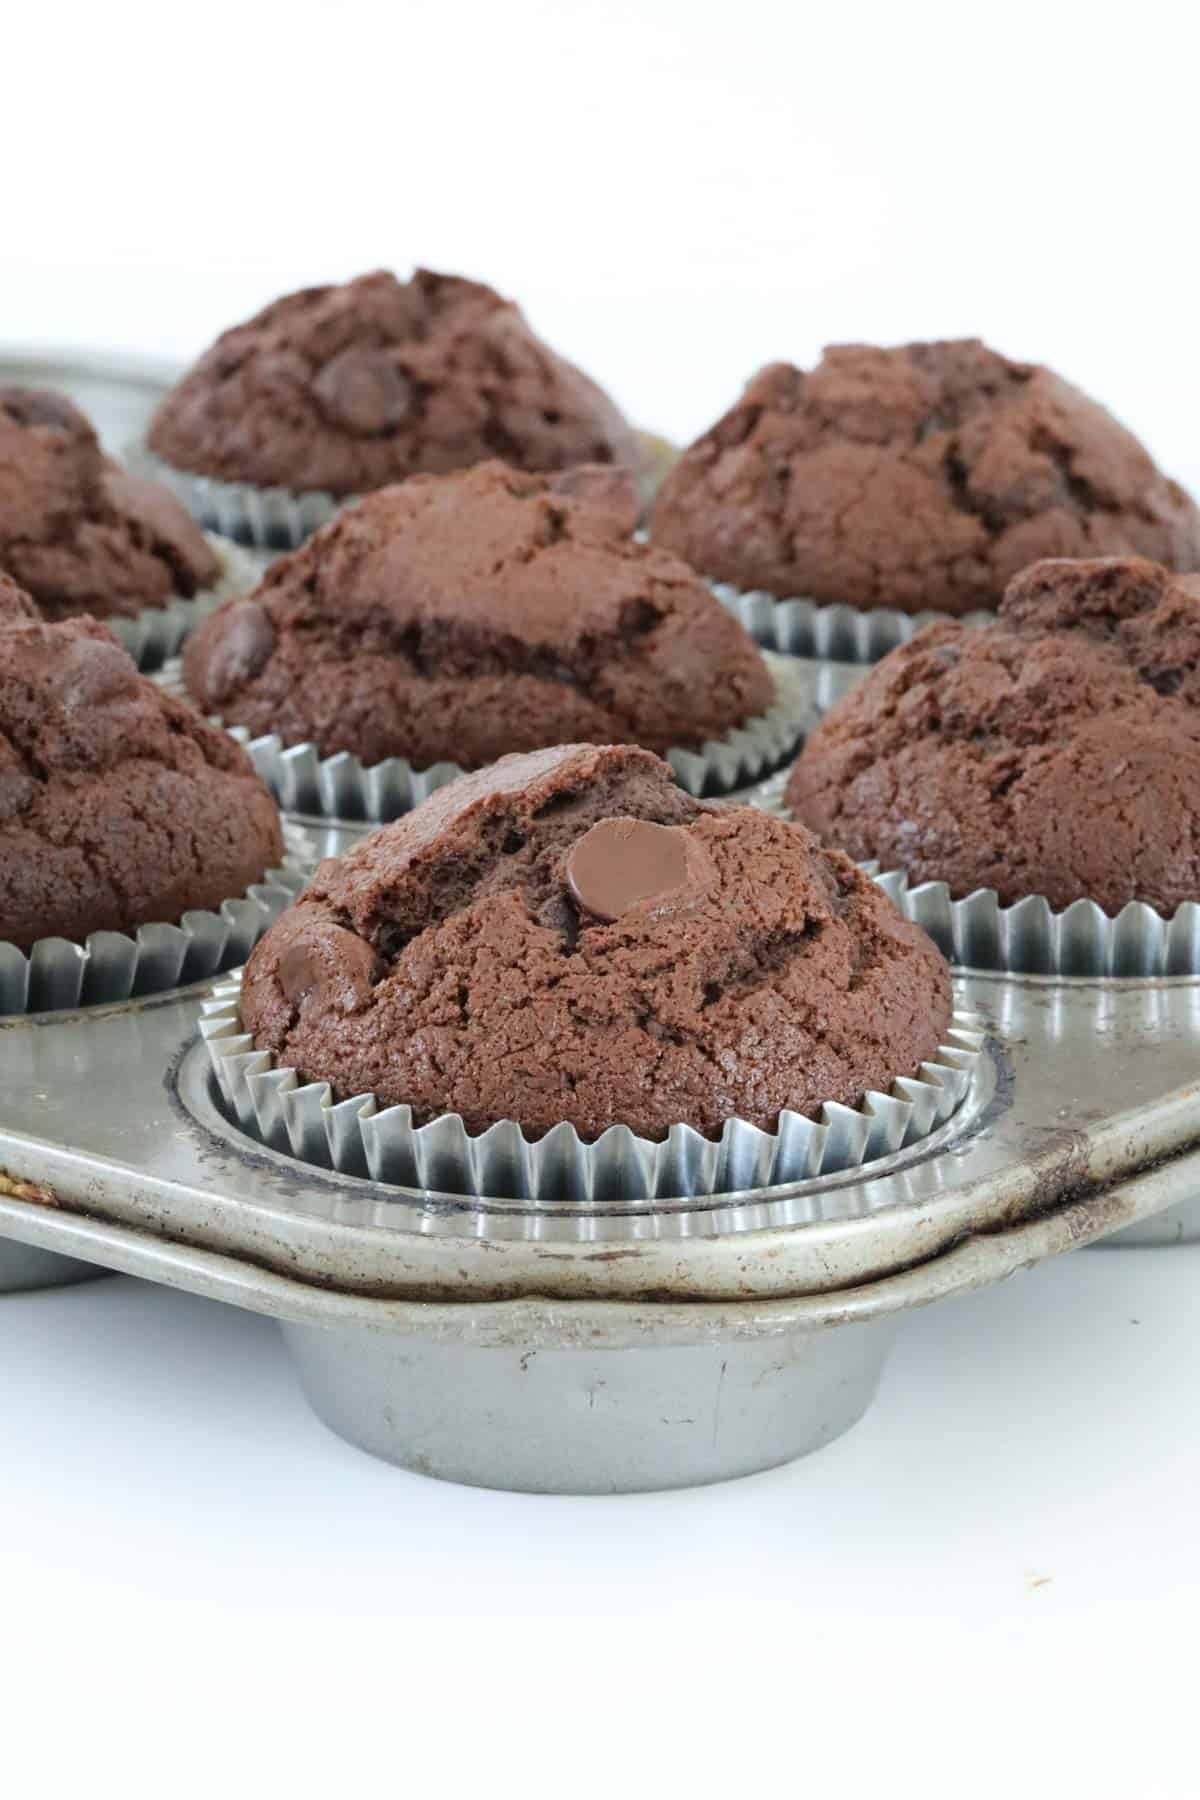 Baked chocolate chip muffins in a muffin tray